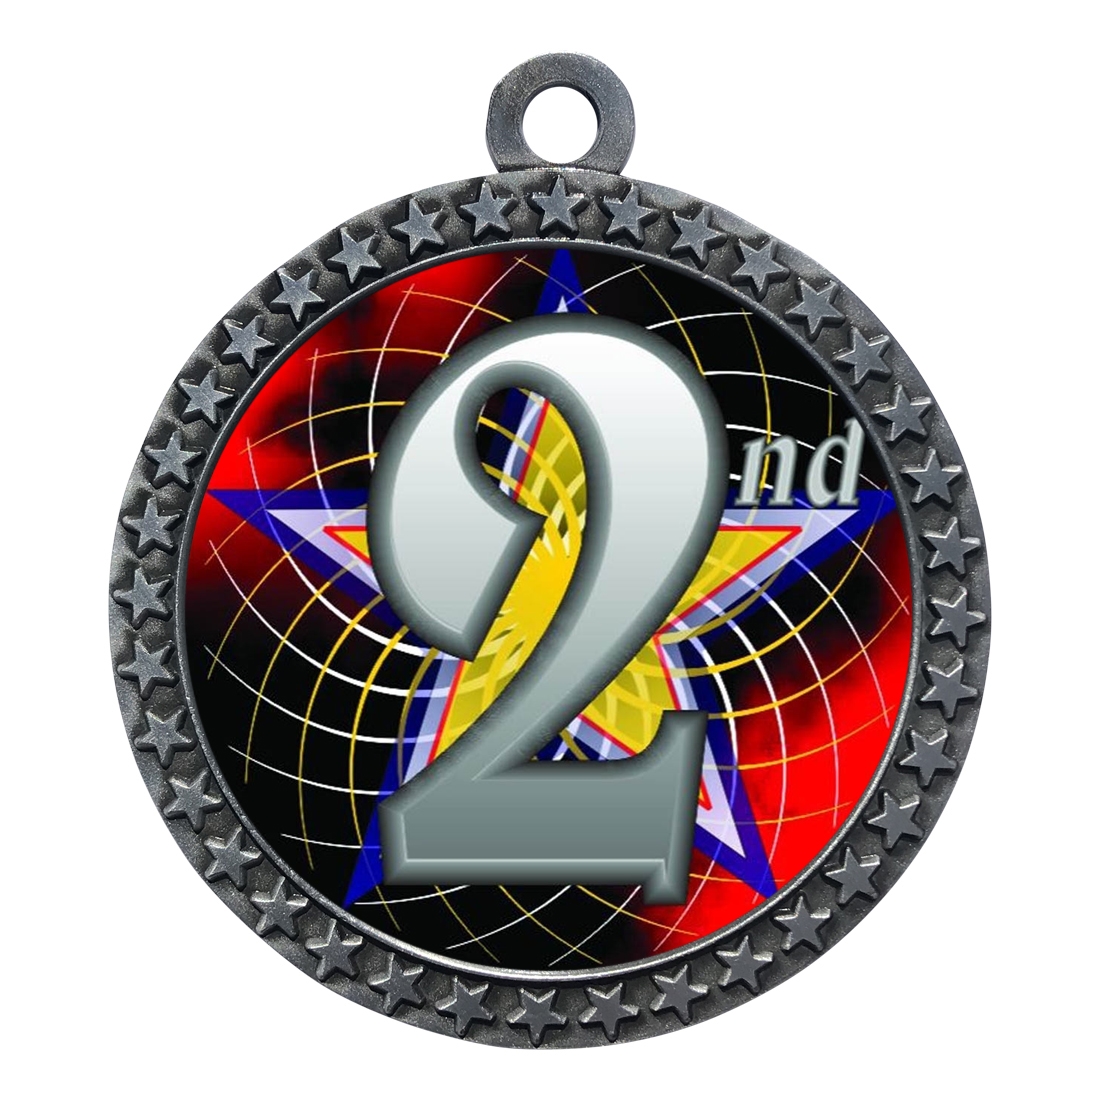 2-1/2" 2nd Place Medal